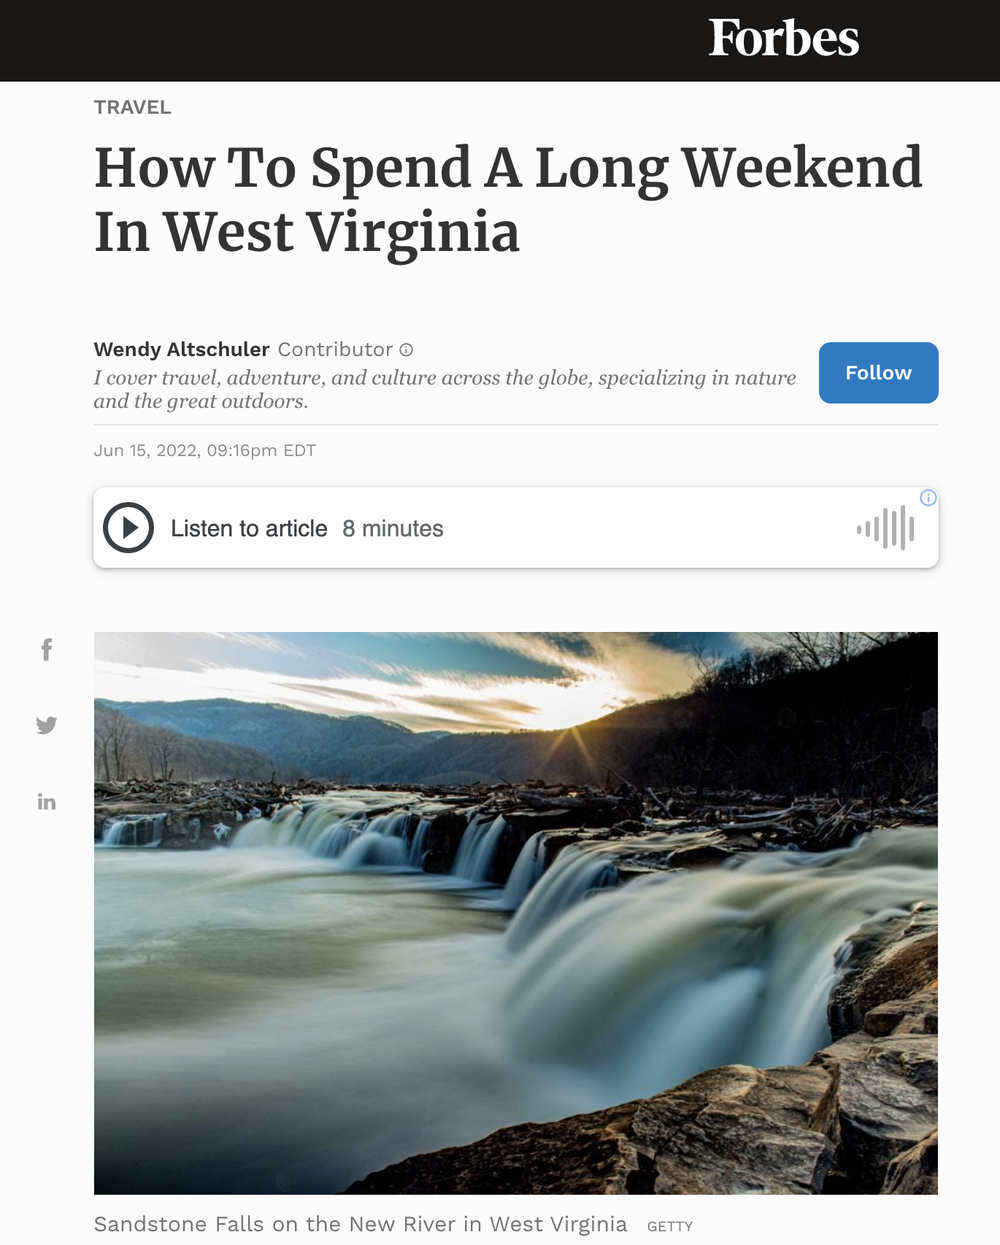 How To Spend A Long Weekend In West Virginia